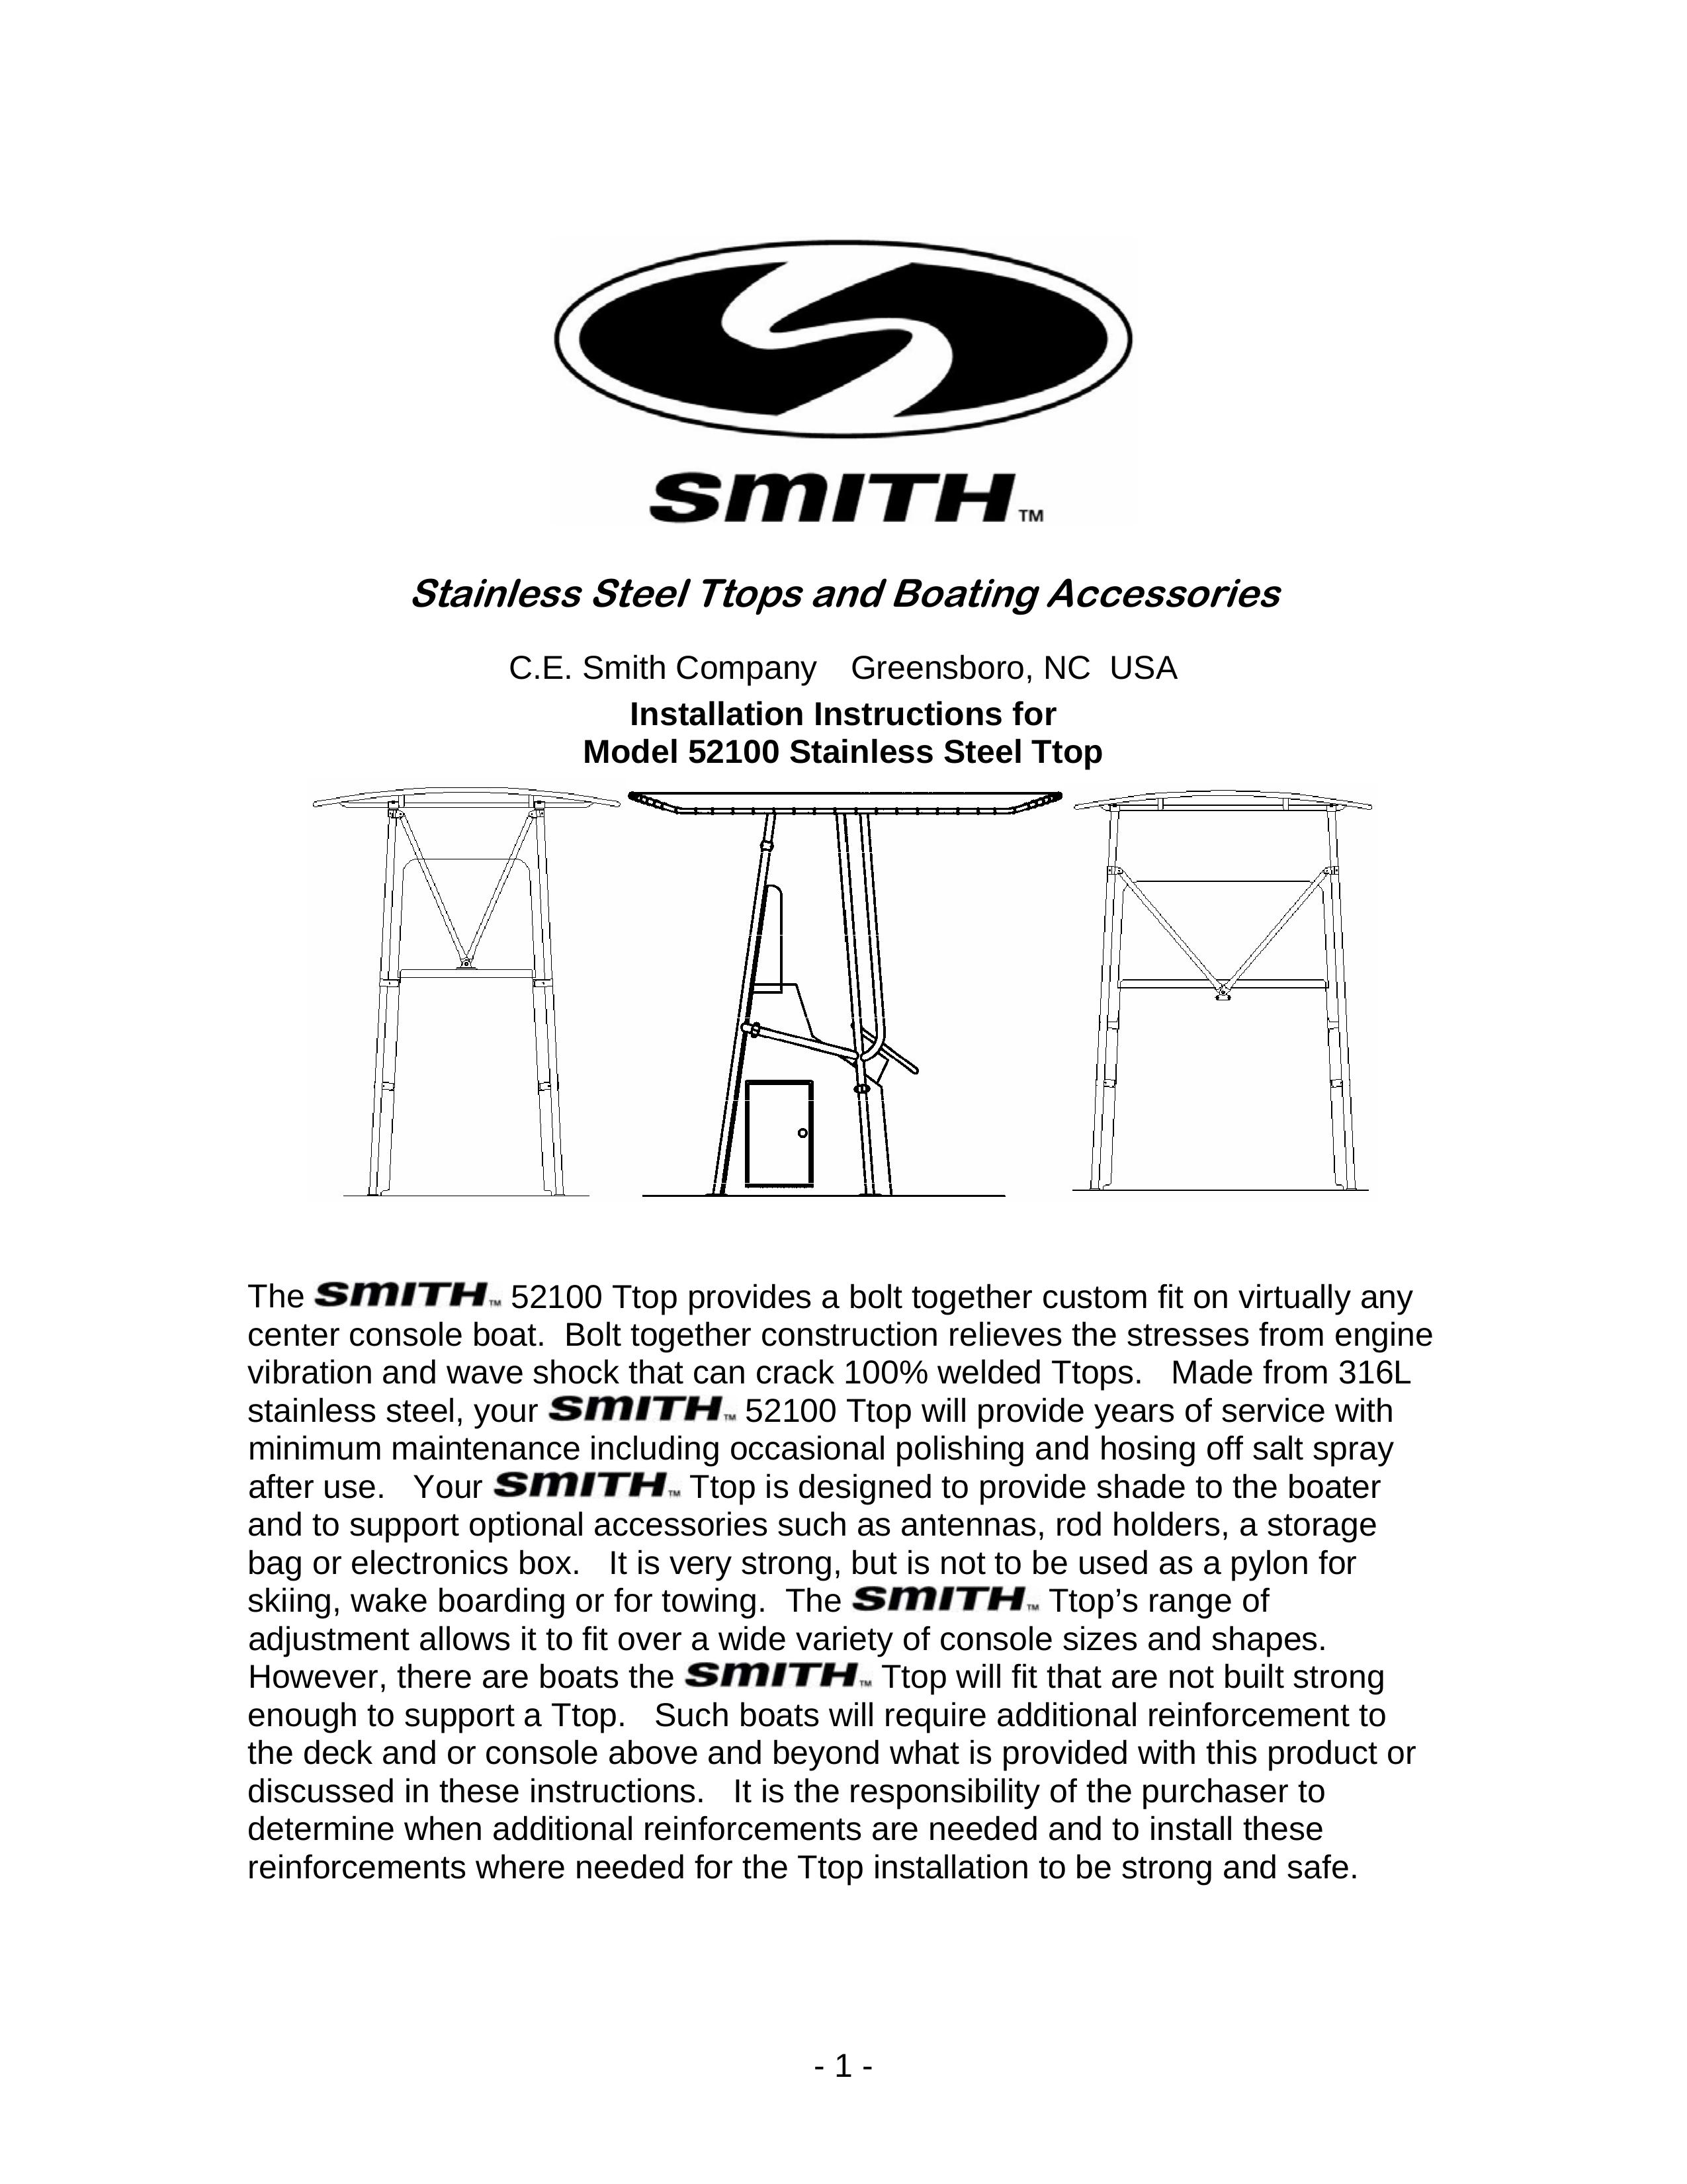 C. E. Smith 52100 Boating Equipment User Manual (Page 1)